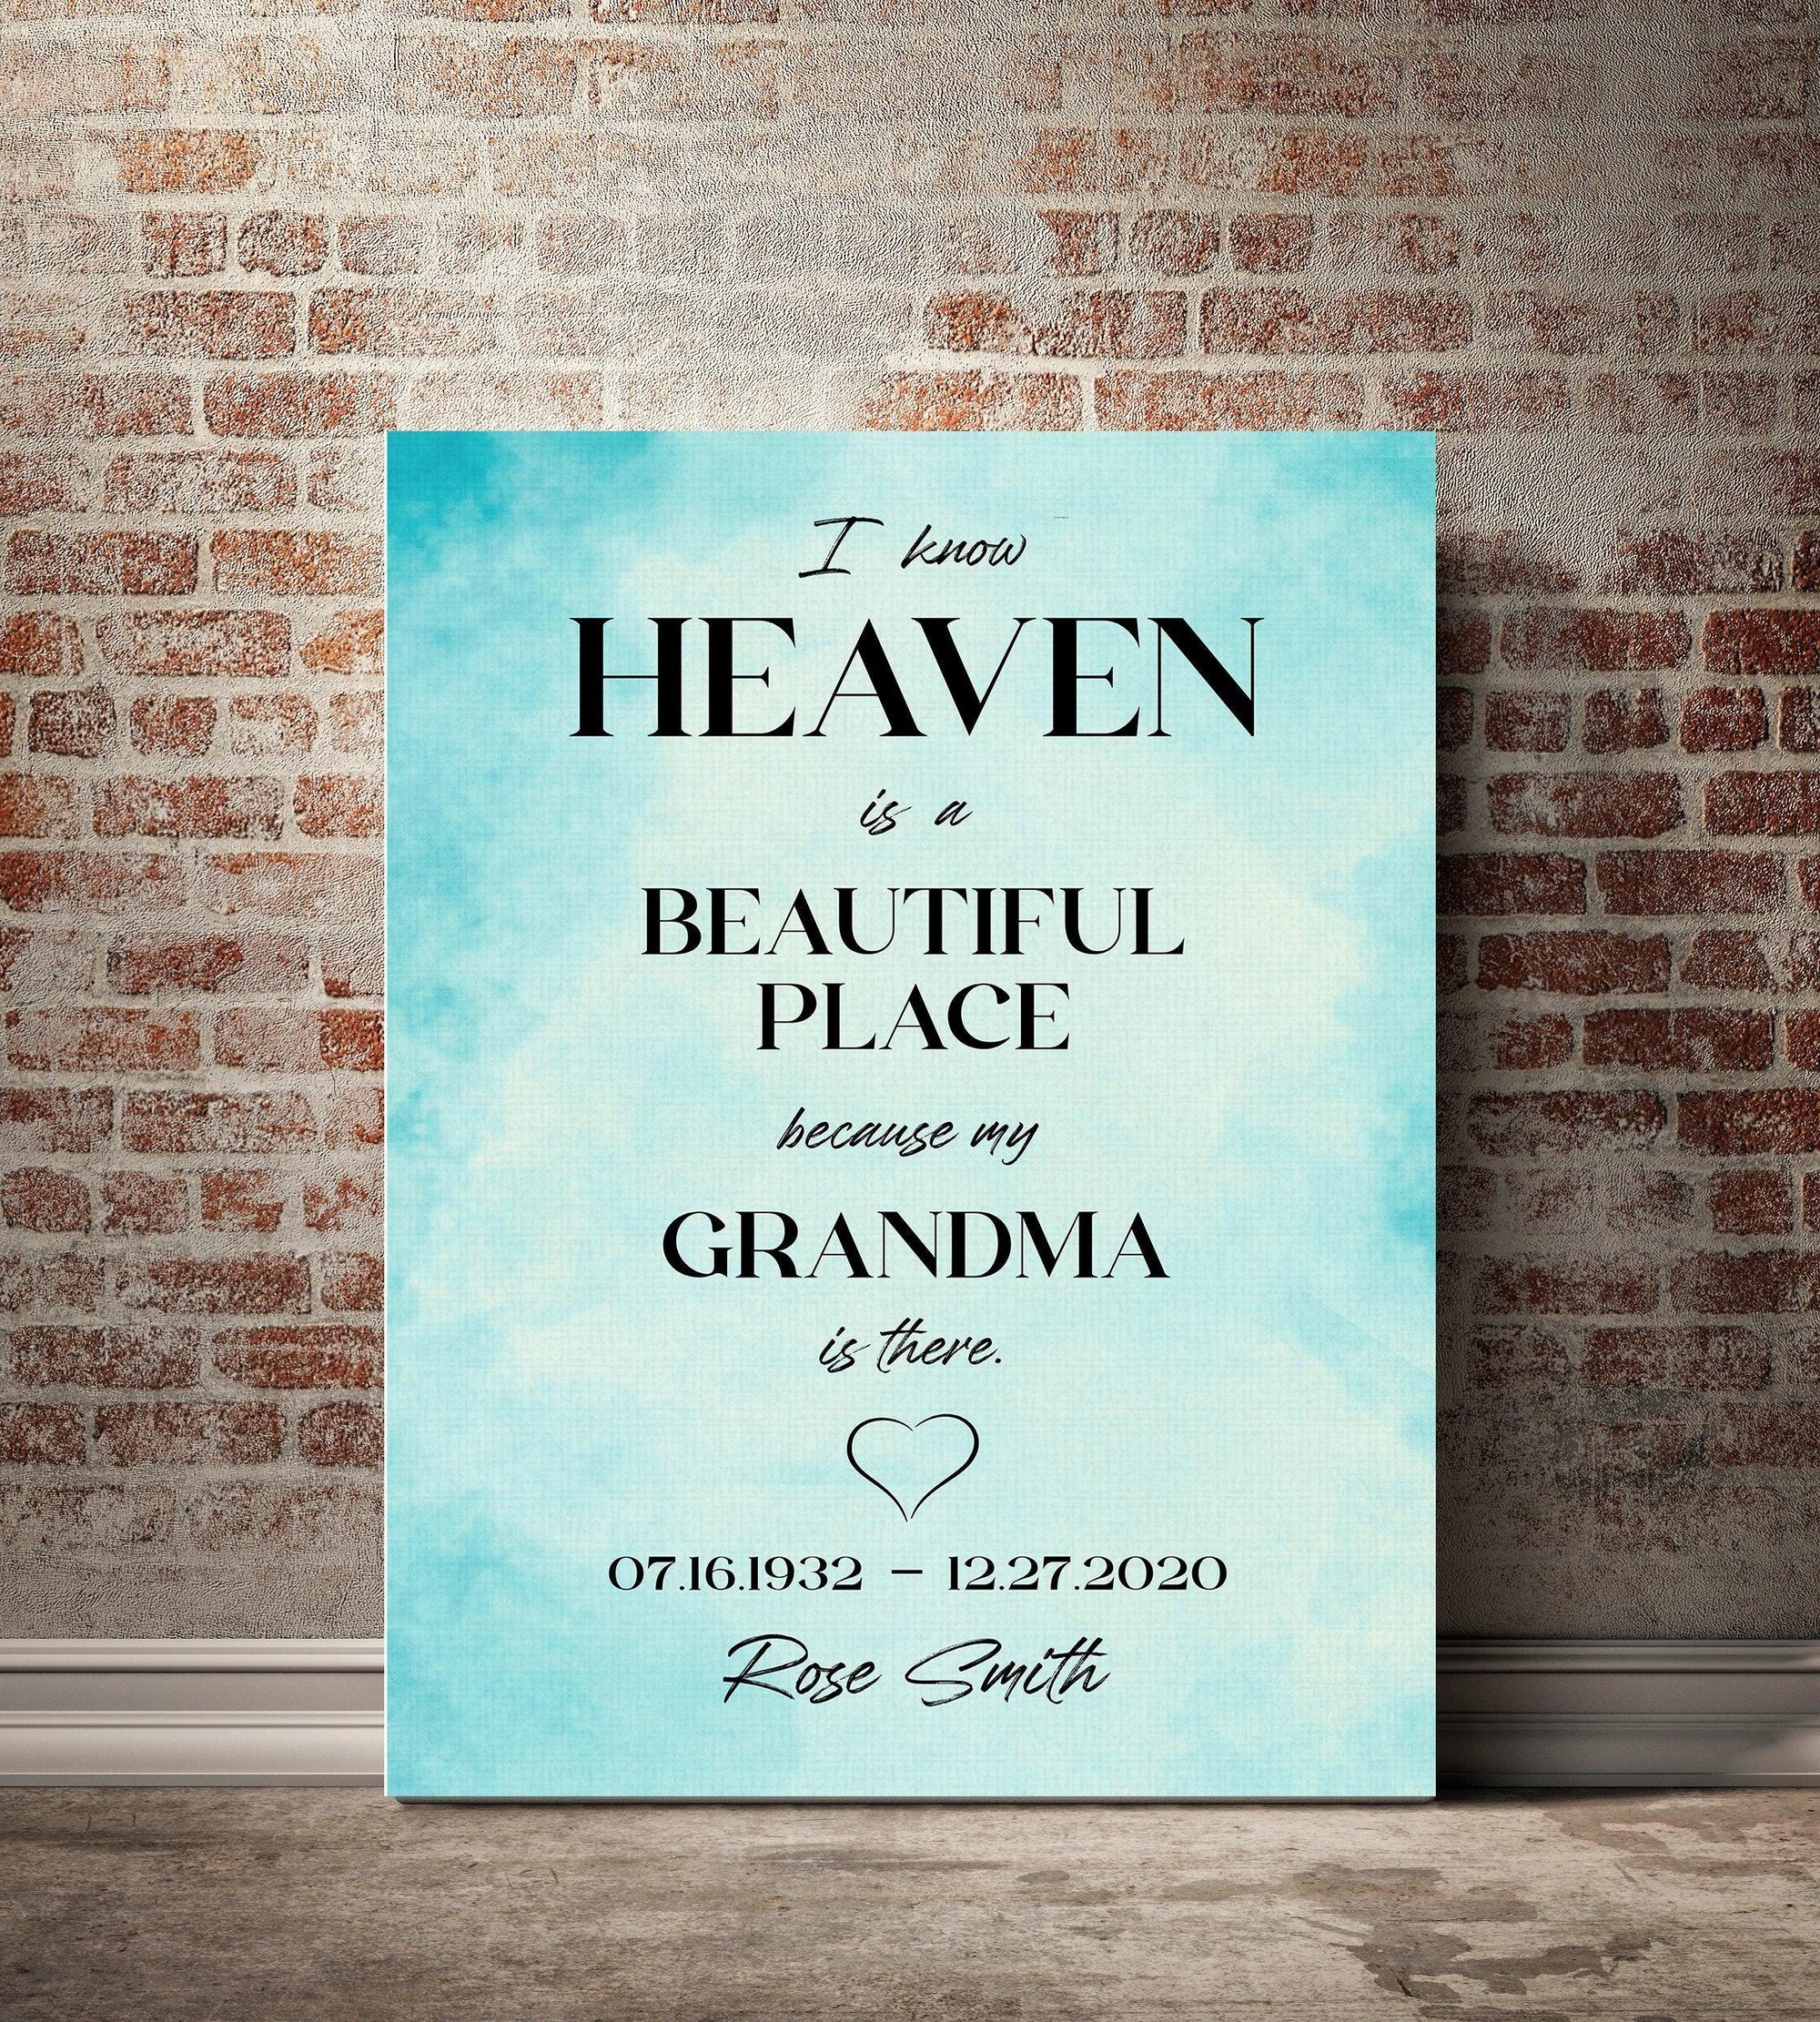 Heaven is a beautiful place because my grandma is there personalized memorial canvas print. Beautiful remembrance keepsake gift. Custom with your loved one's name and life details.